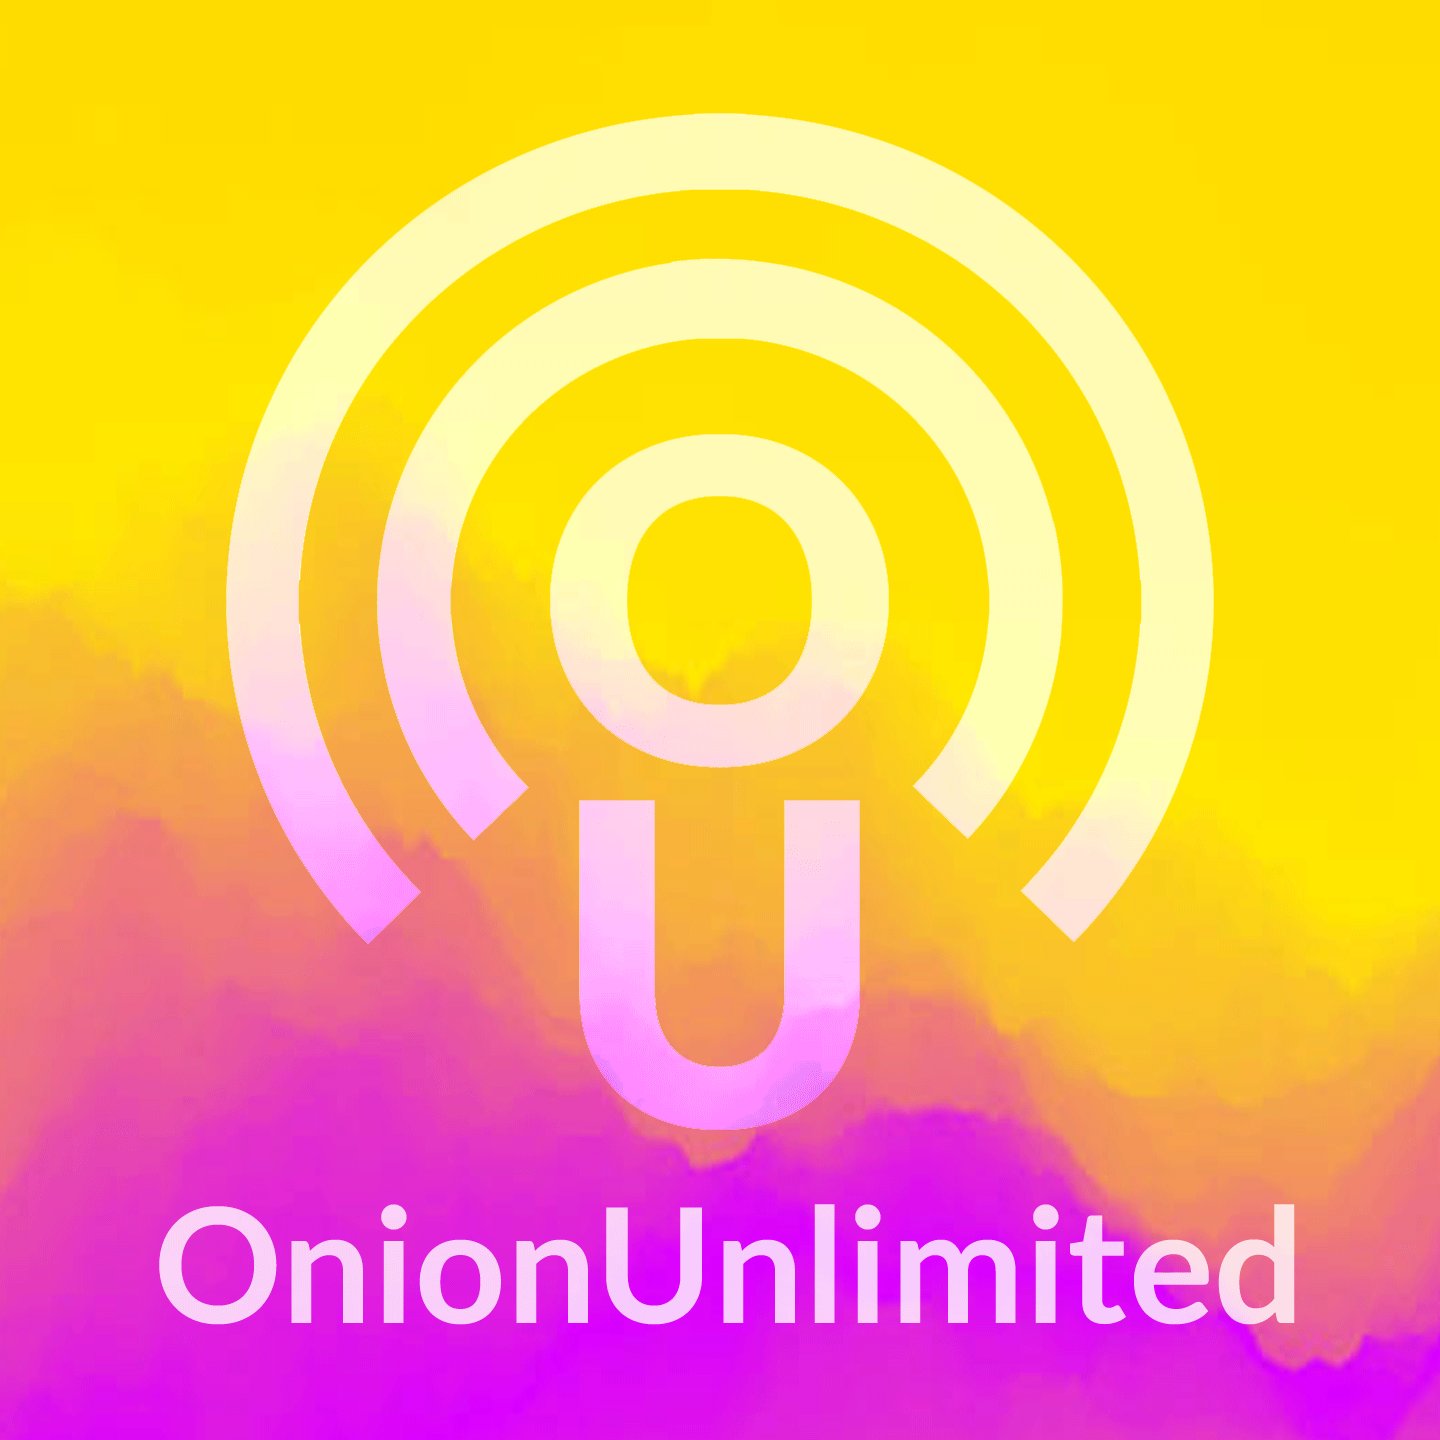 OnionUnlimited podcast on RSS.com